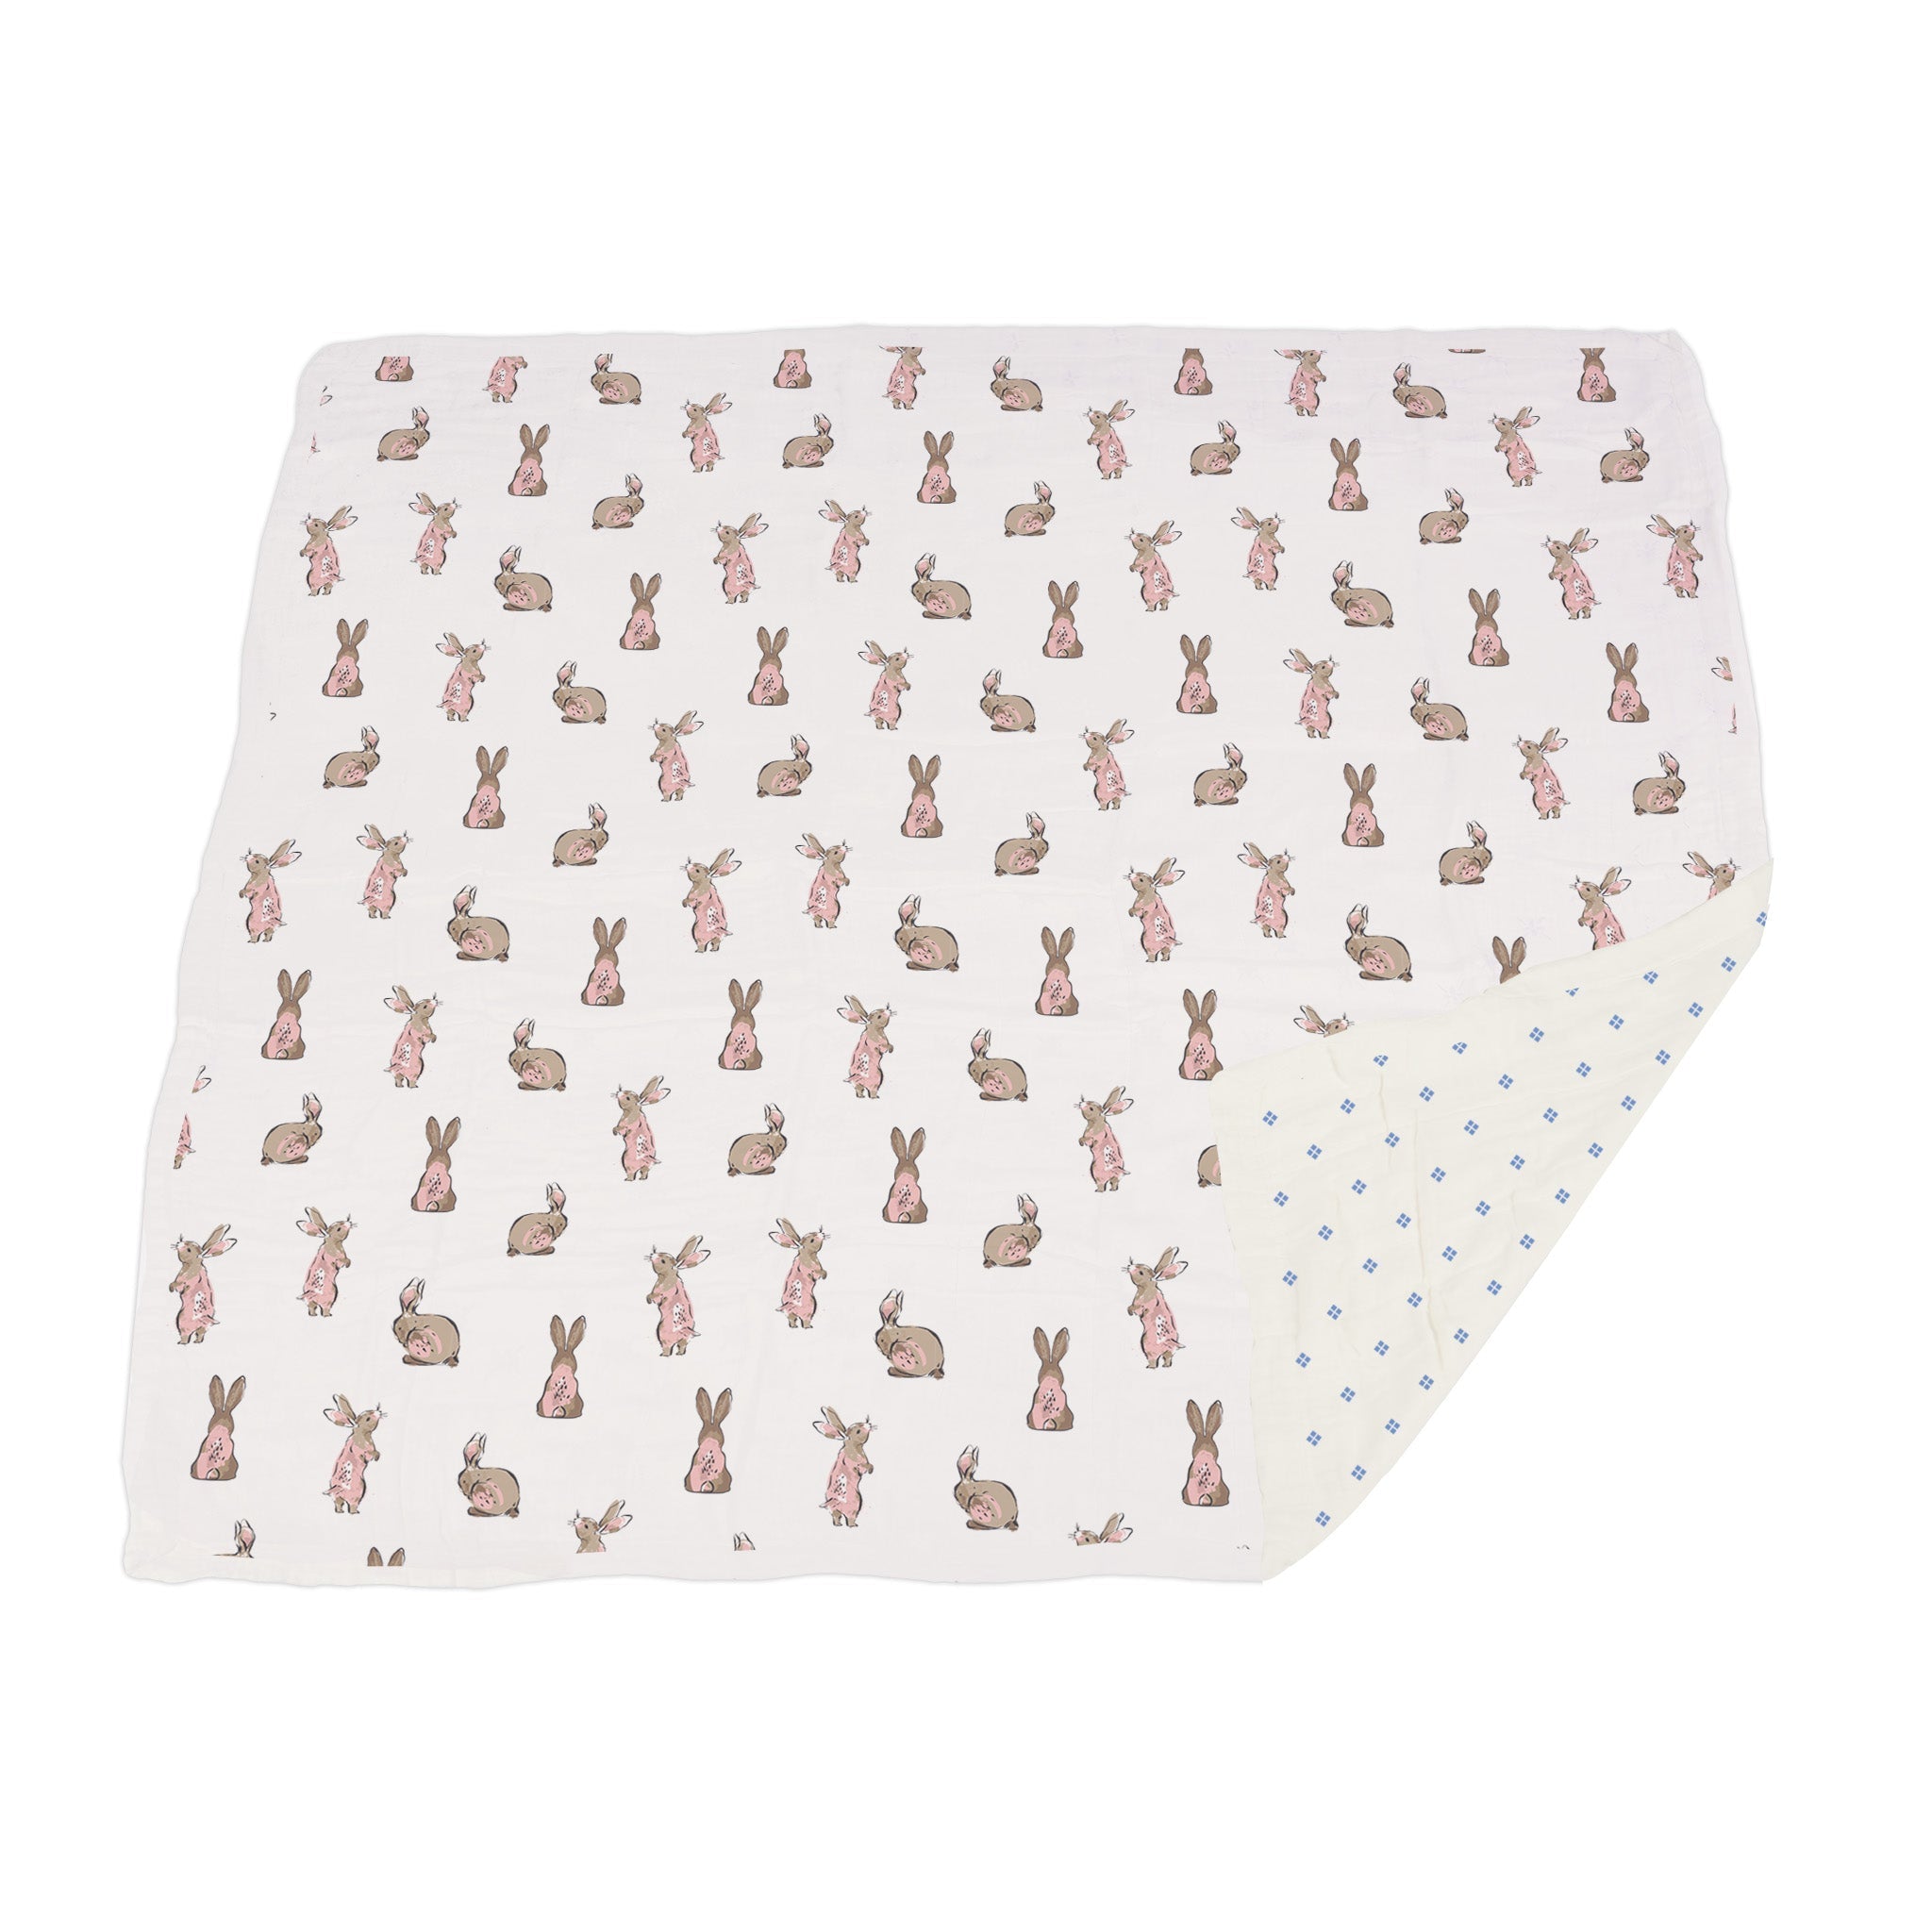 Large blanket for babies with bunnies